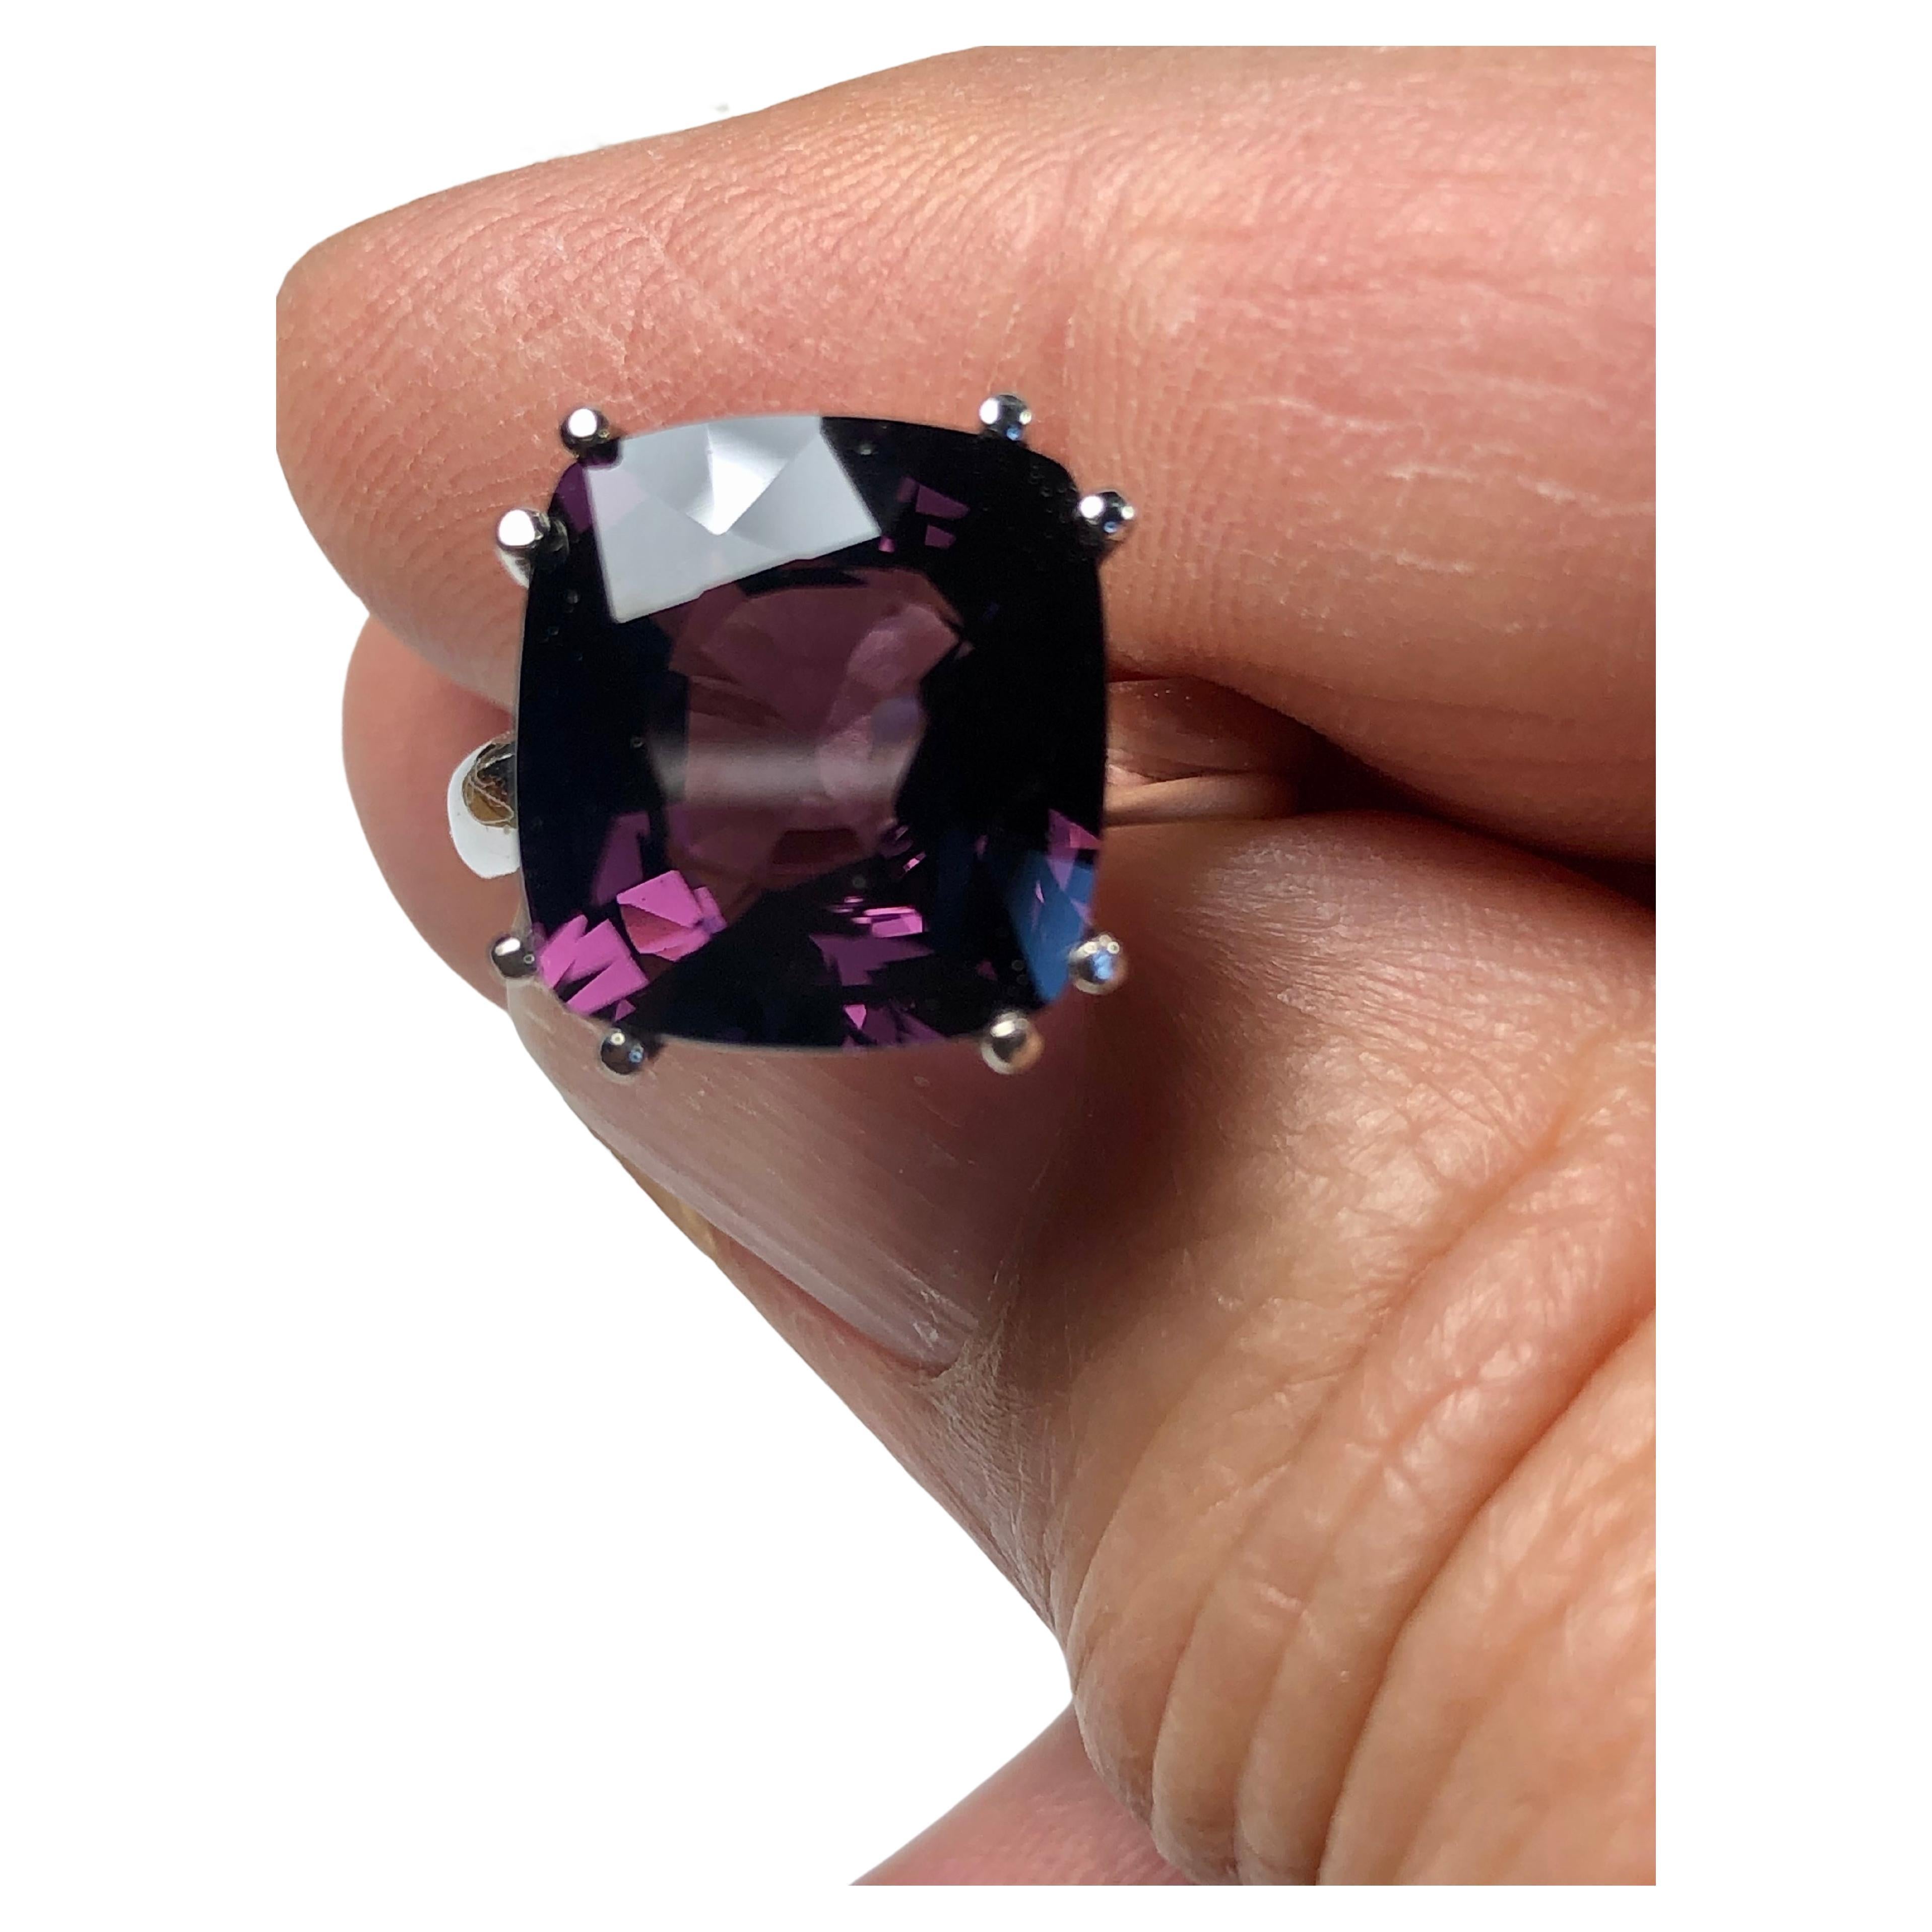 Deep grey mauve cushion cut spinel engagement solitaire ring. The gorgeous cushion cut spinel is set in an 18k solitaire white gold setting. The center natural untreated spinel is 8.22 carats. The gemstone is well-cut. The color is crispy and almost